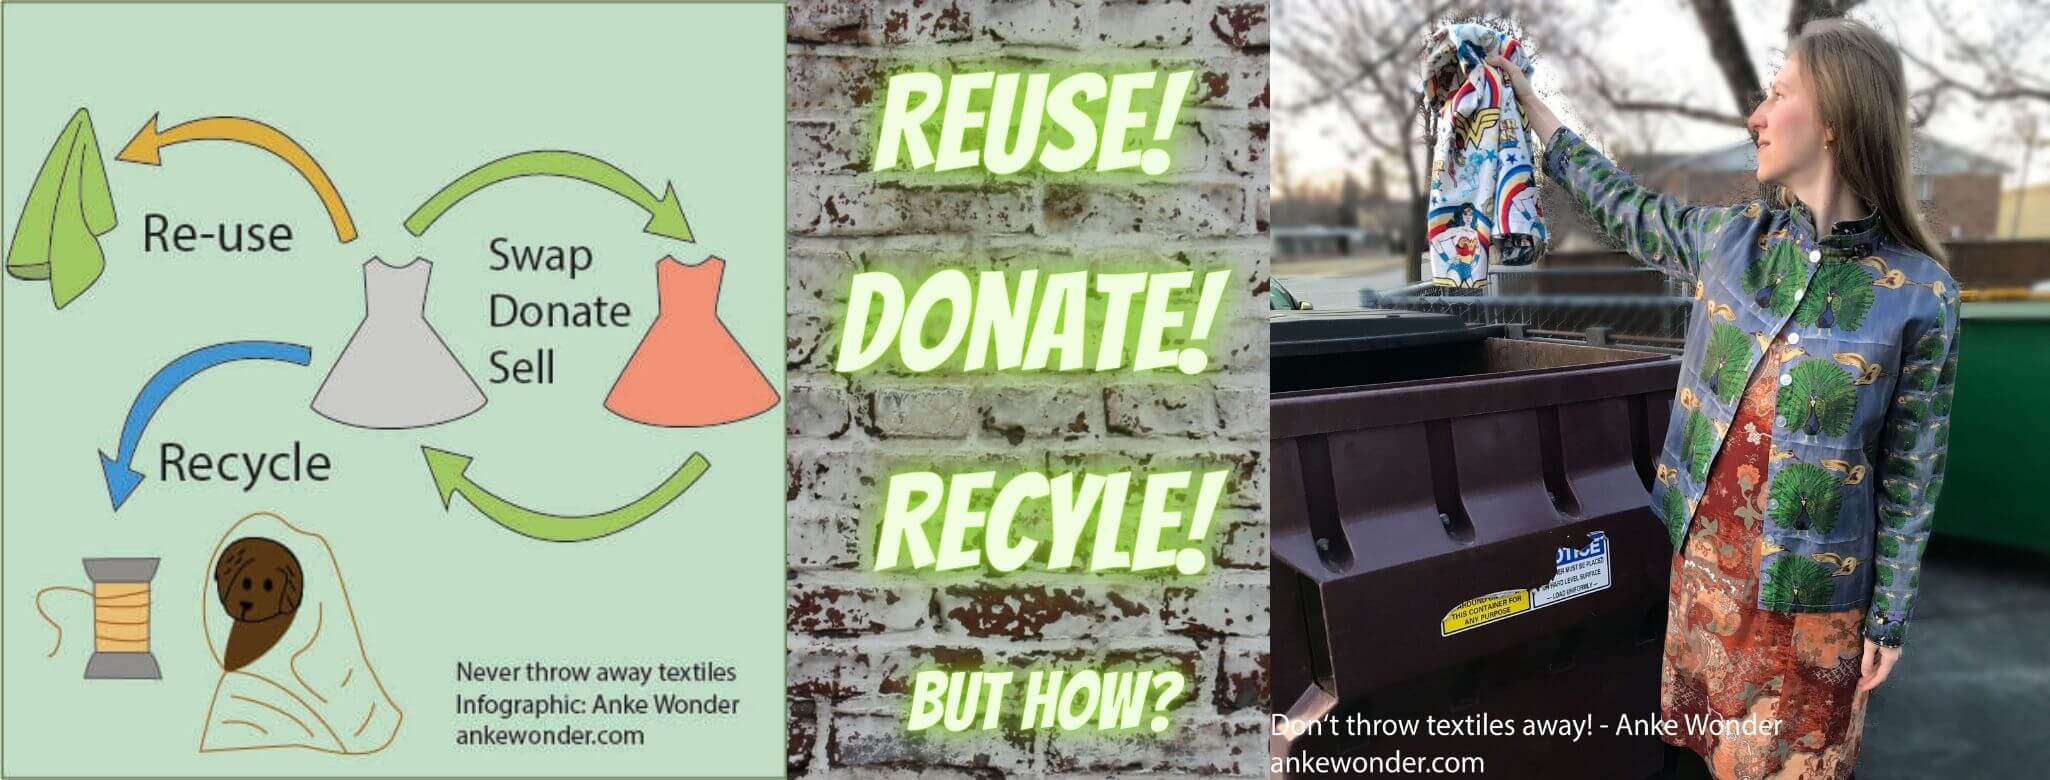 How to Recycle Clothes That Can't Be Repaired, Donated or Resold